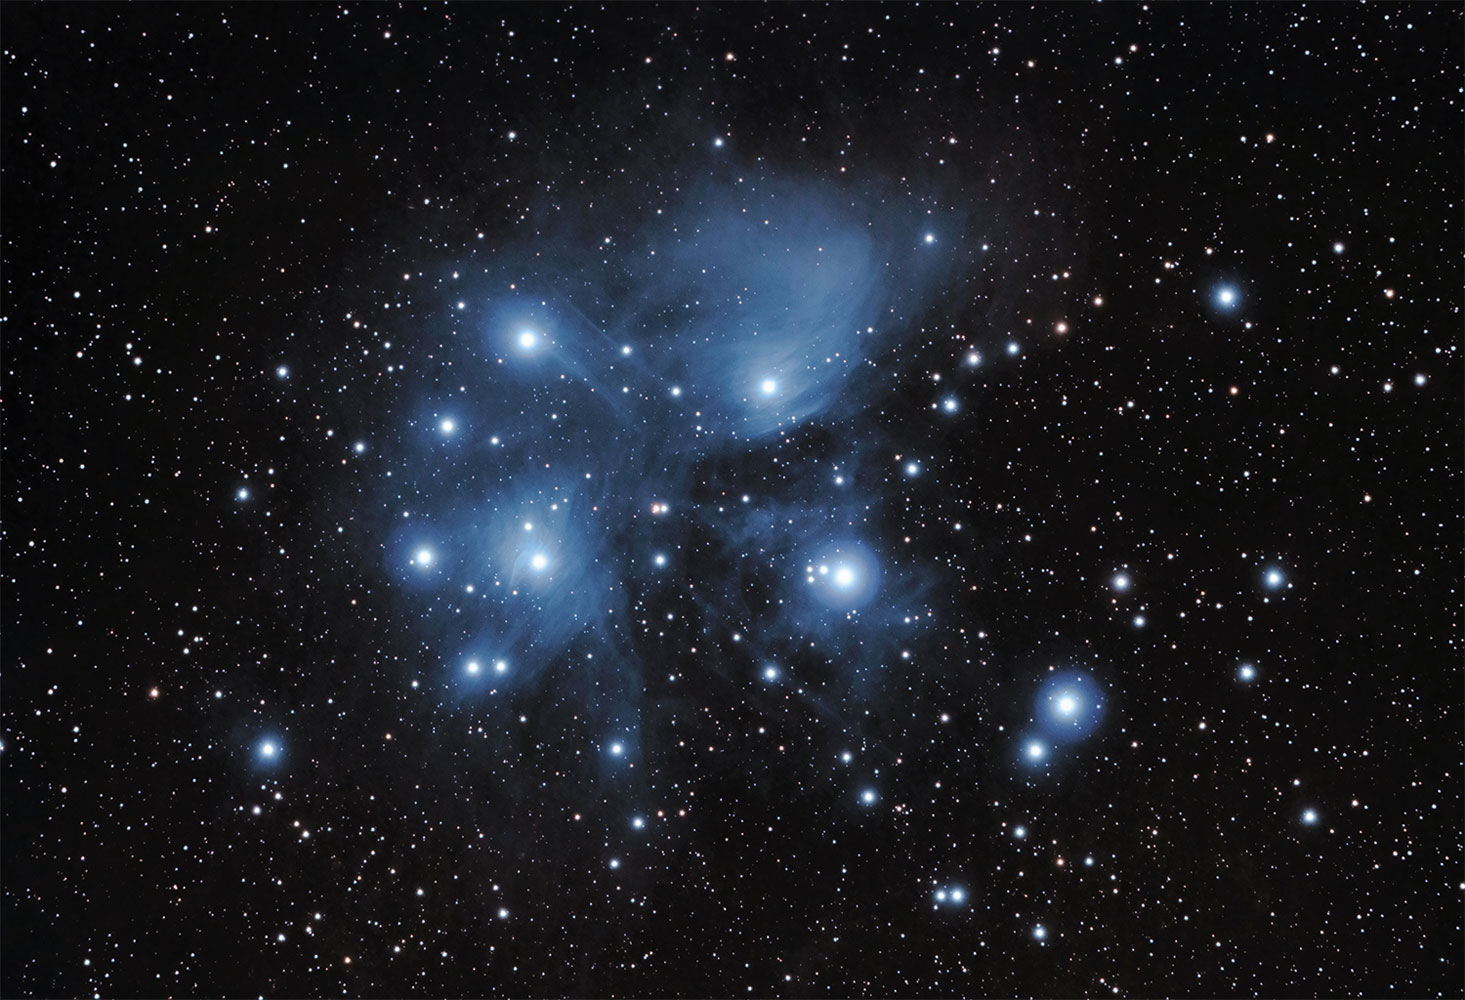 The Pleiades, also known as M45 or the Seven Sisters, imaged from Fayetteville, Ark., on Jan. 25, 2014.